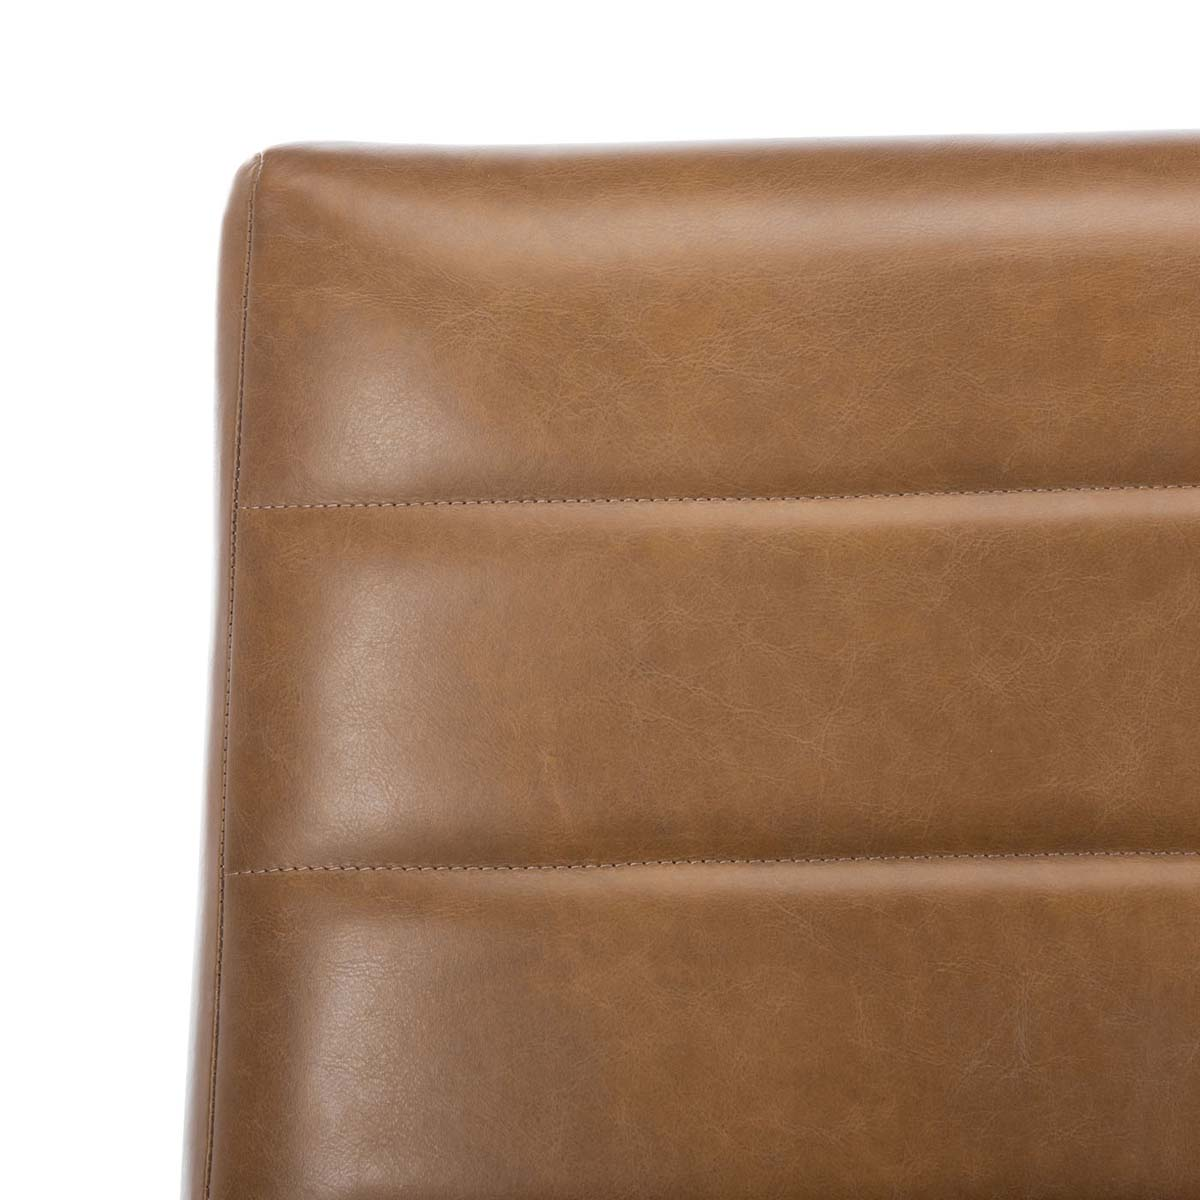 Safavieh Couture Willow Channel Tufted Arm Chair - Gingerbread / Dark Walnut